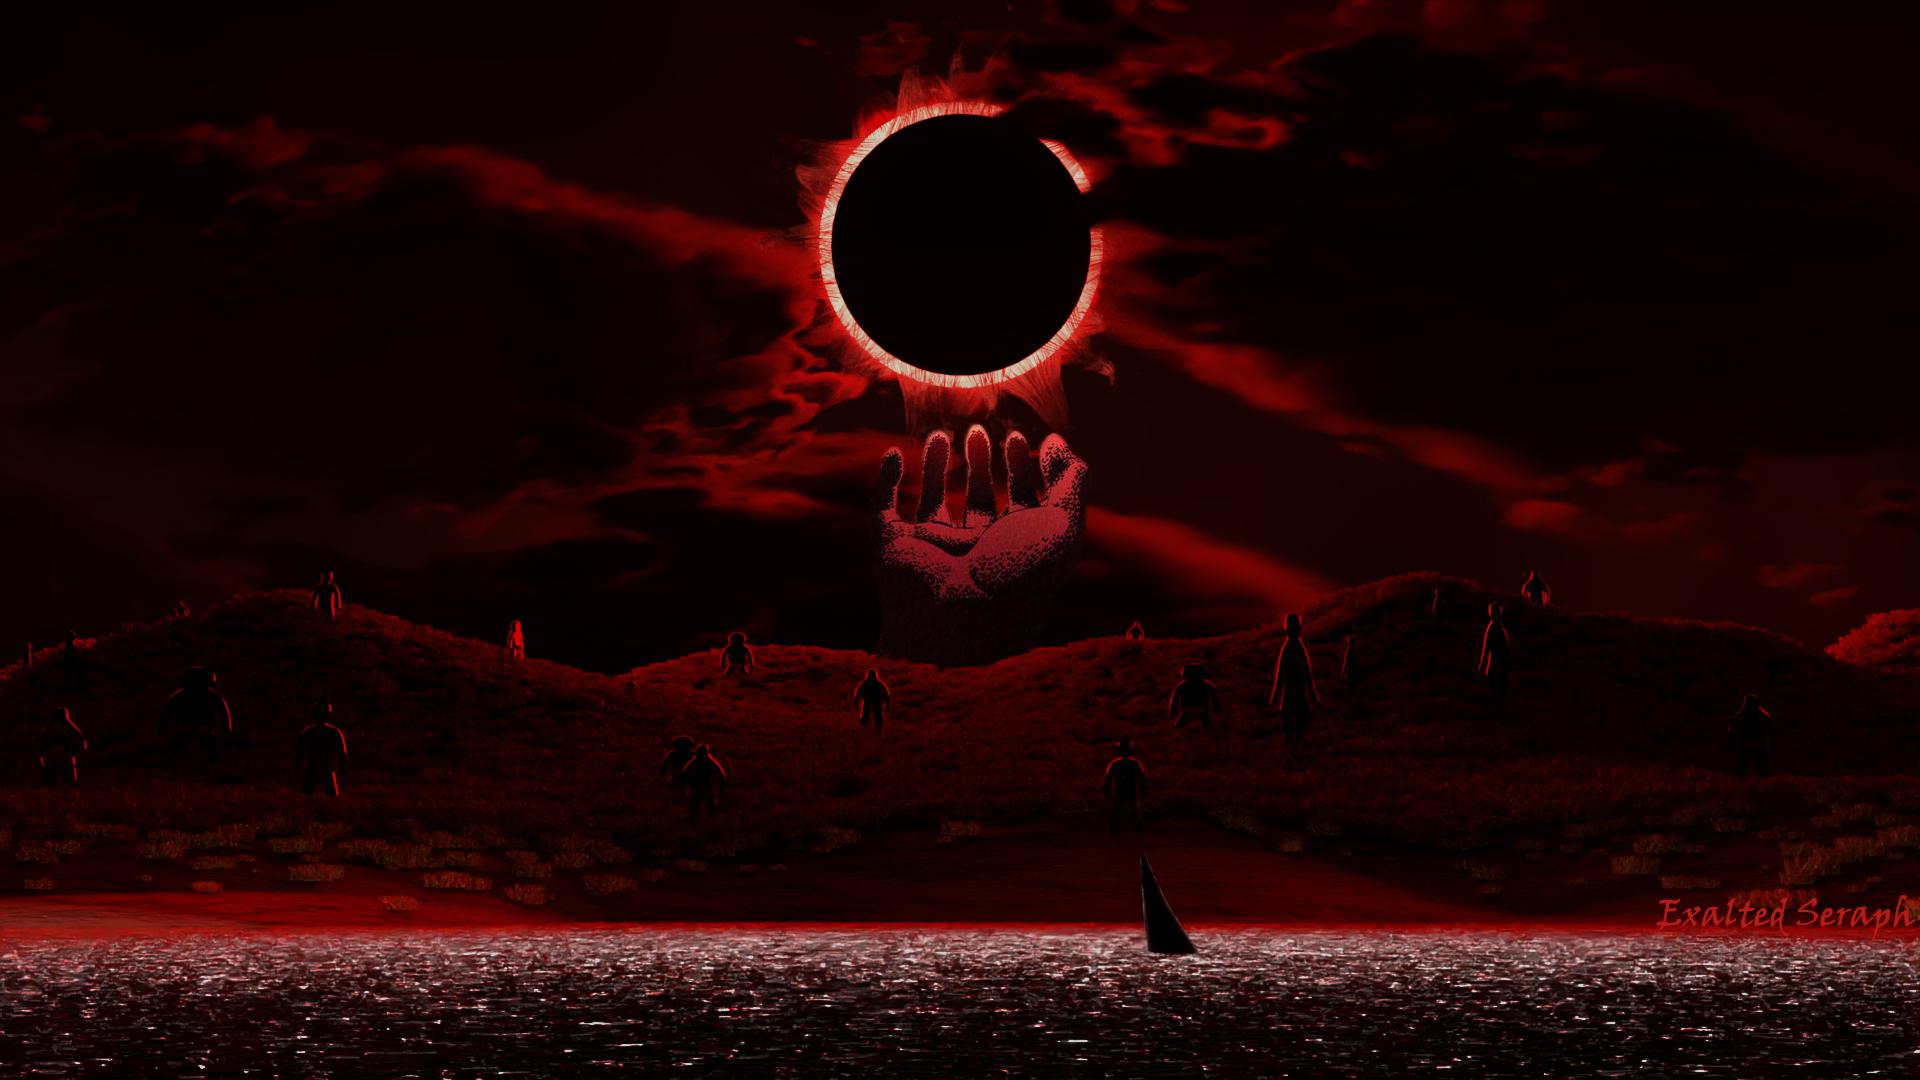 The sun is blocked by a giant hand, with a red sky and red water. - Eclipse